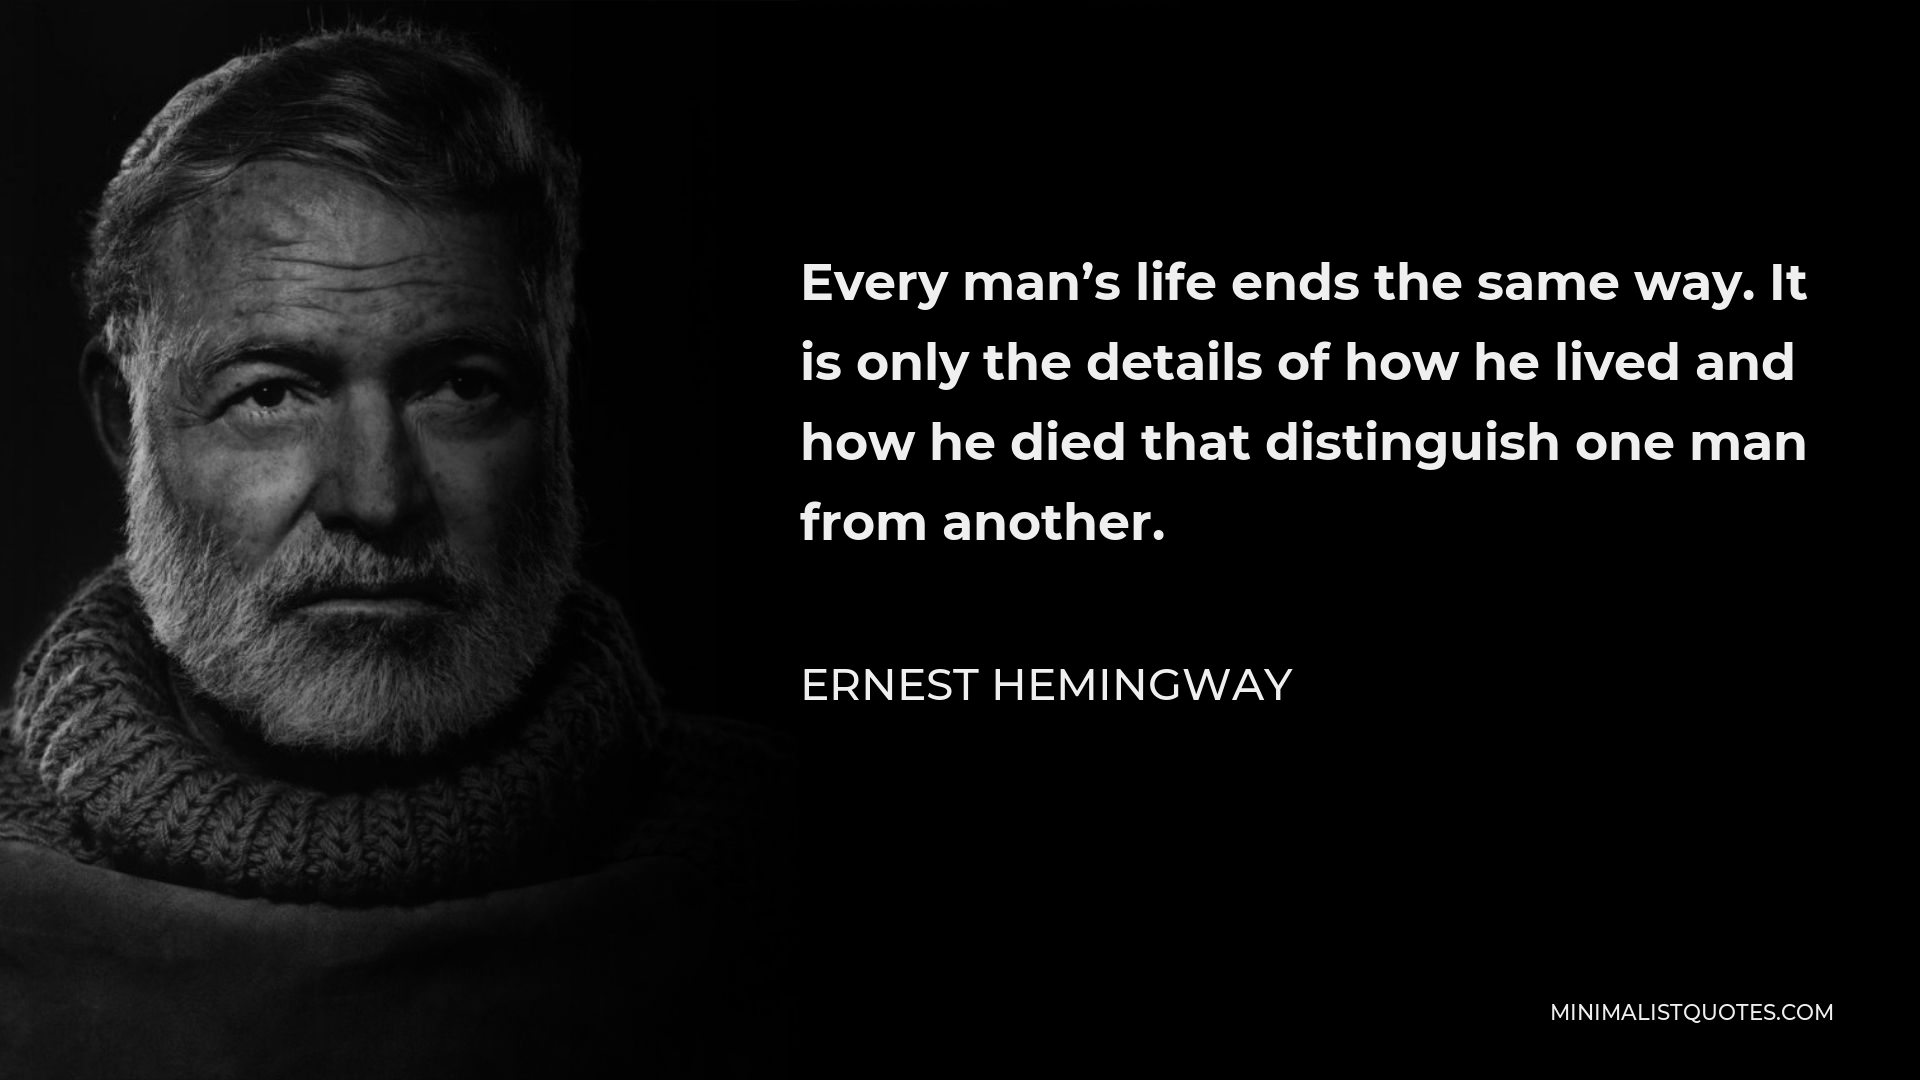 Ernest Hemingway Quote - Every man’s life ends the same way. It is only the details of how he lived and how he died that distinguish one man from another.